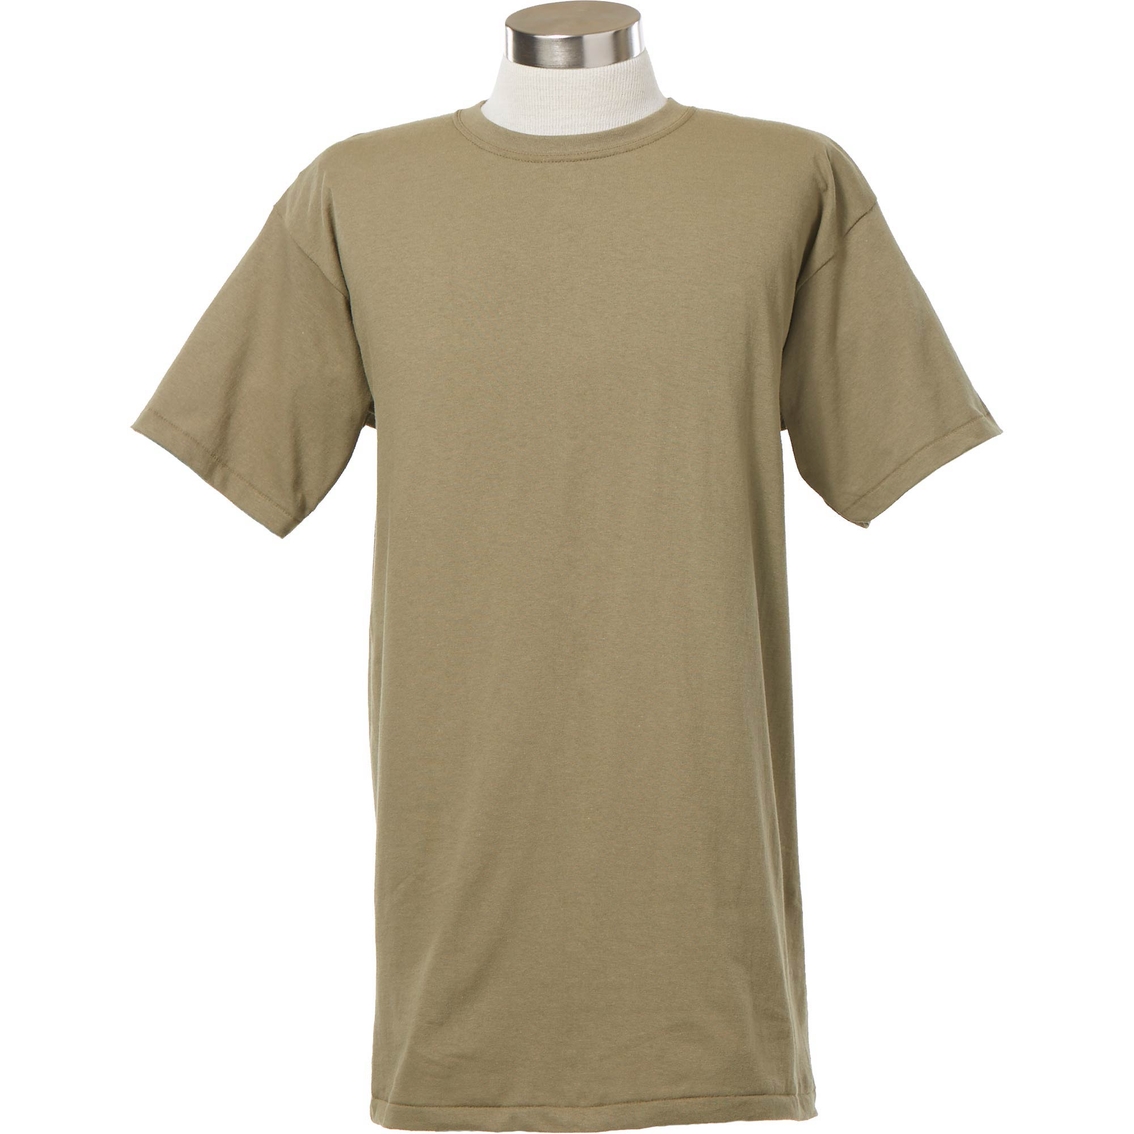 US Military Army Moisture Wicking Lightweight T-Shirt Tan Size Small EXC 